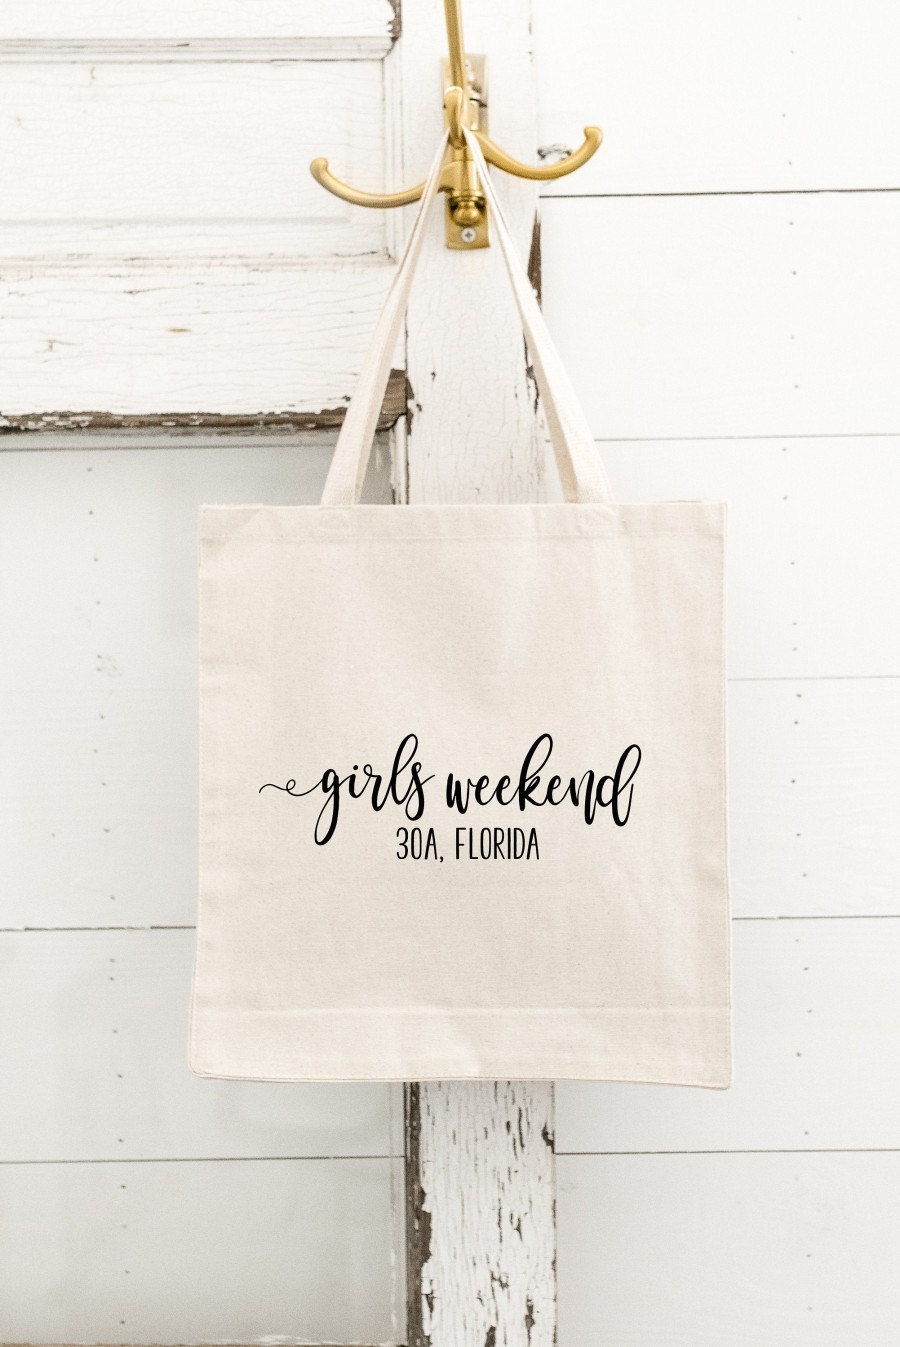 Mariage - Girls Weekend Tote with Location - Girls Wknd - Weekend Tote - Girls Getaway - Girls Trip - Gift - Tote Bag - Weekend Trip - Girls Weekend